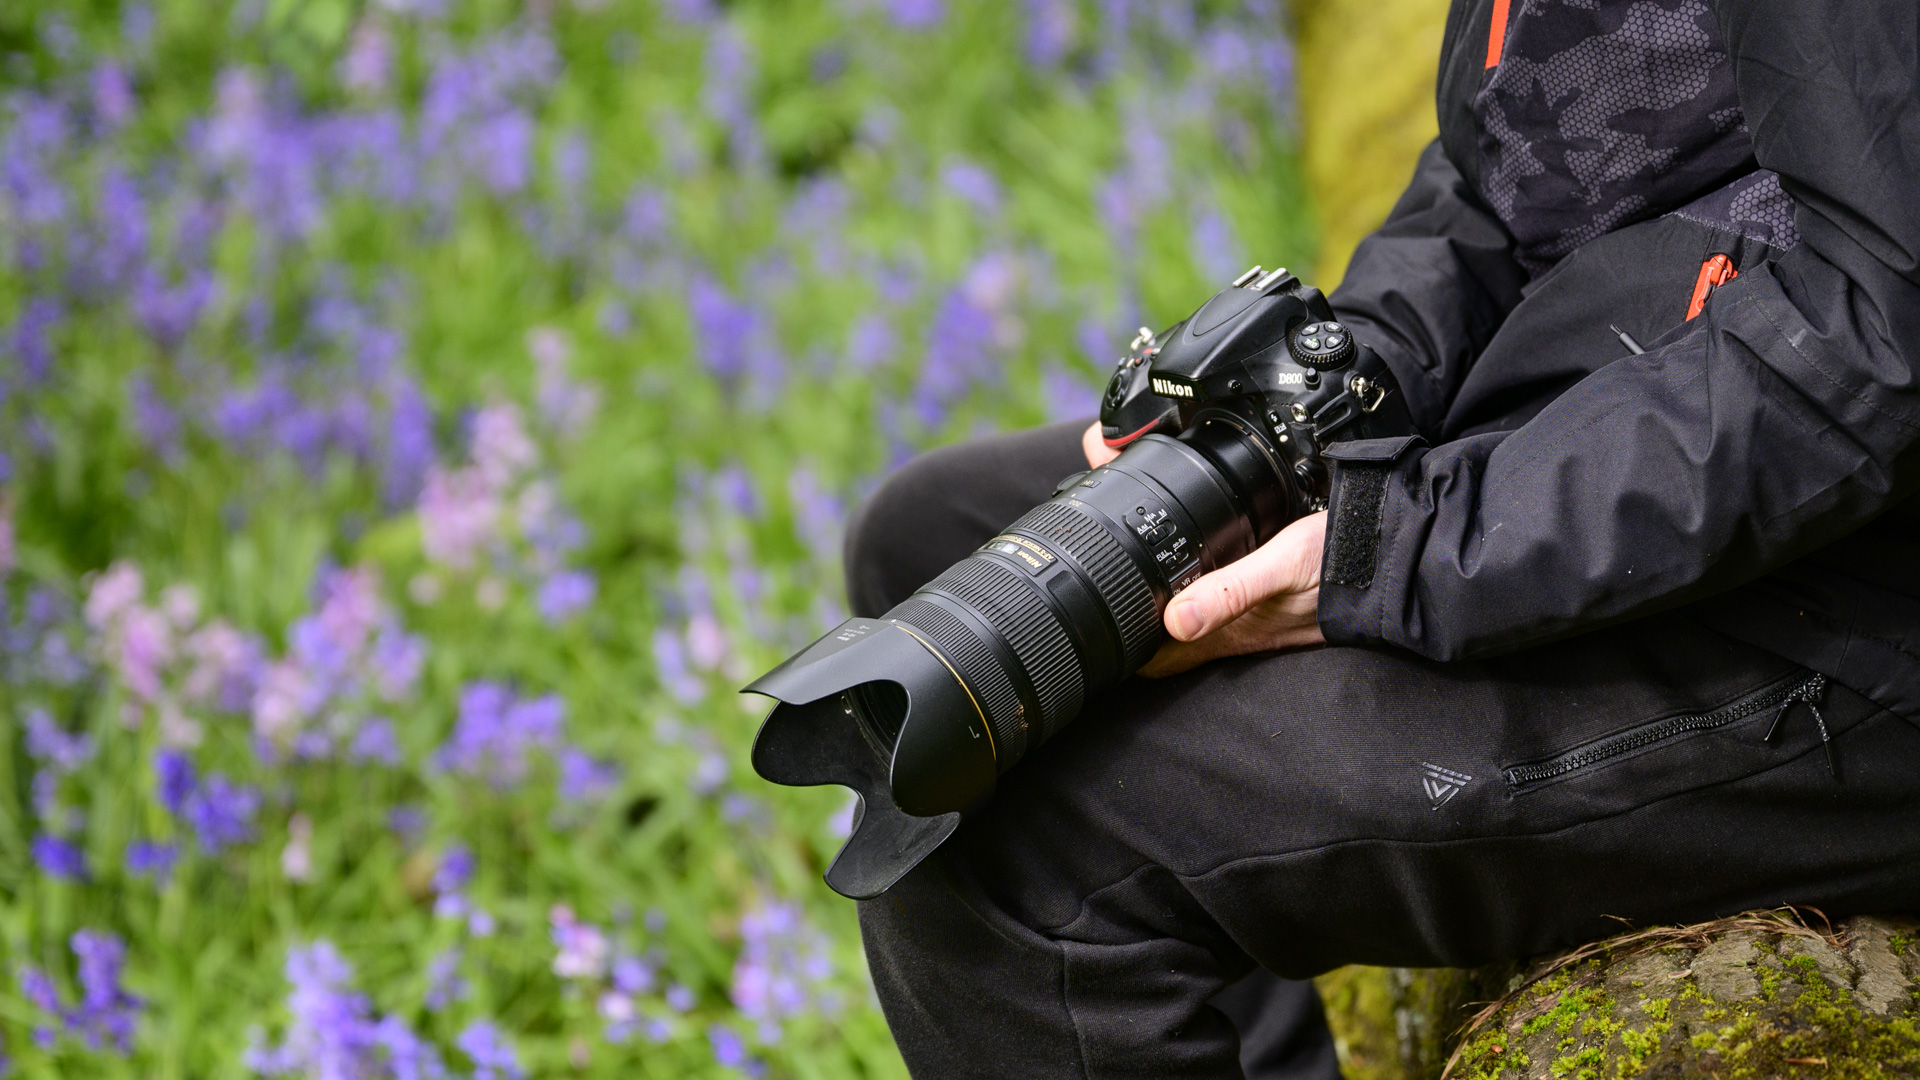 Nikon D800 DSLR camera being held with photographer sitting on tree trunk surrounded by bluebells